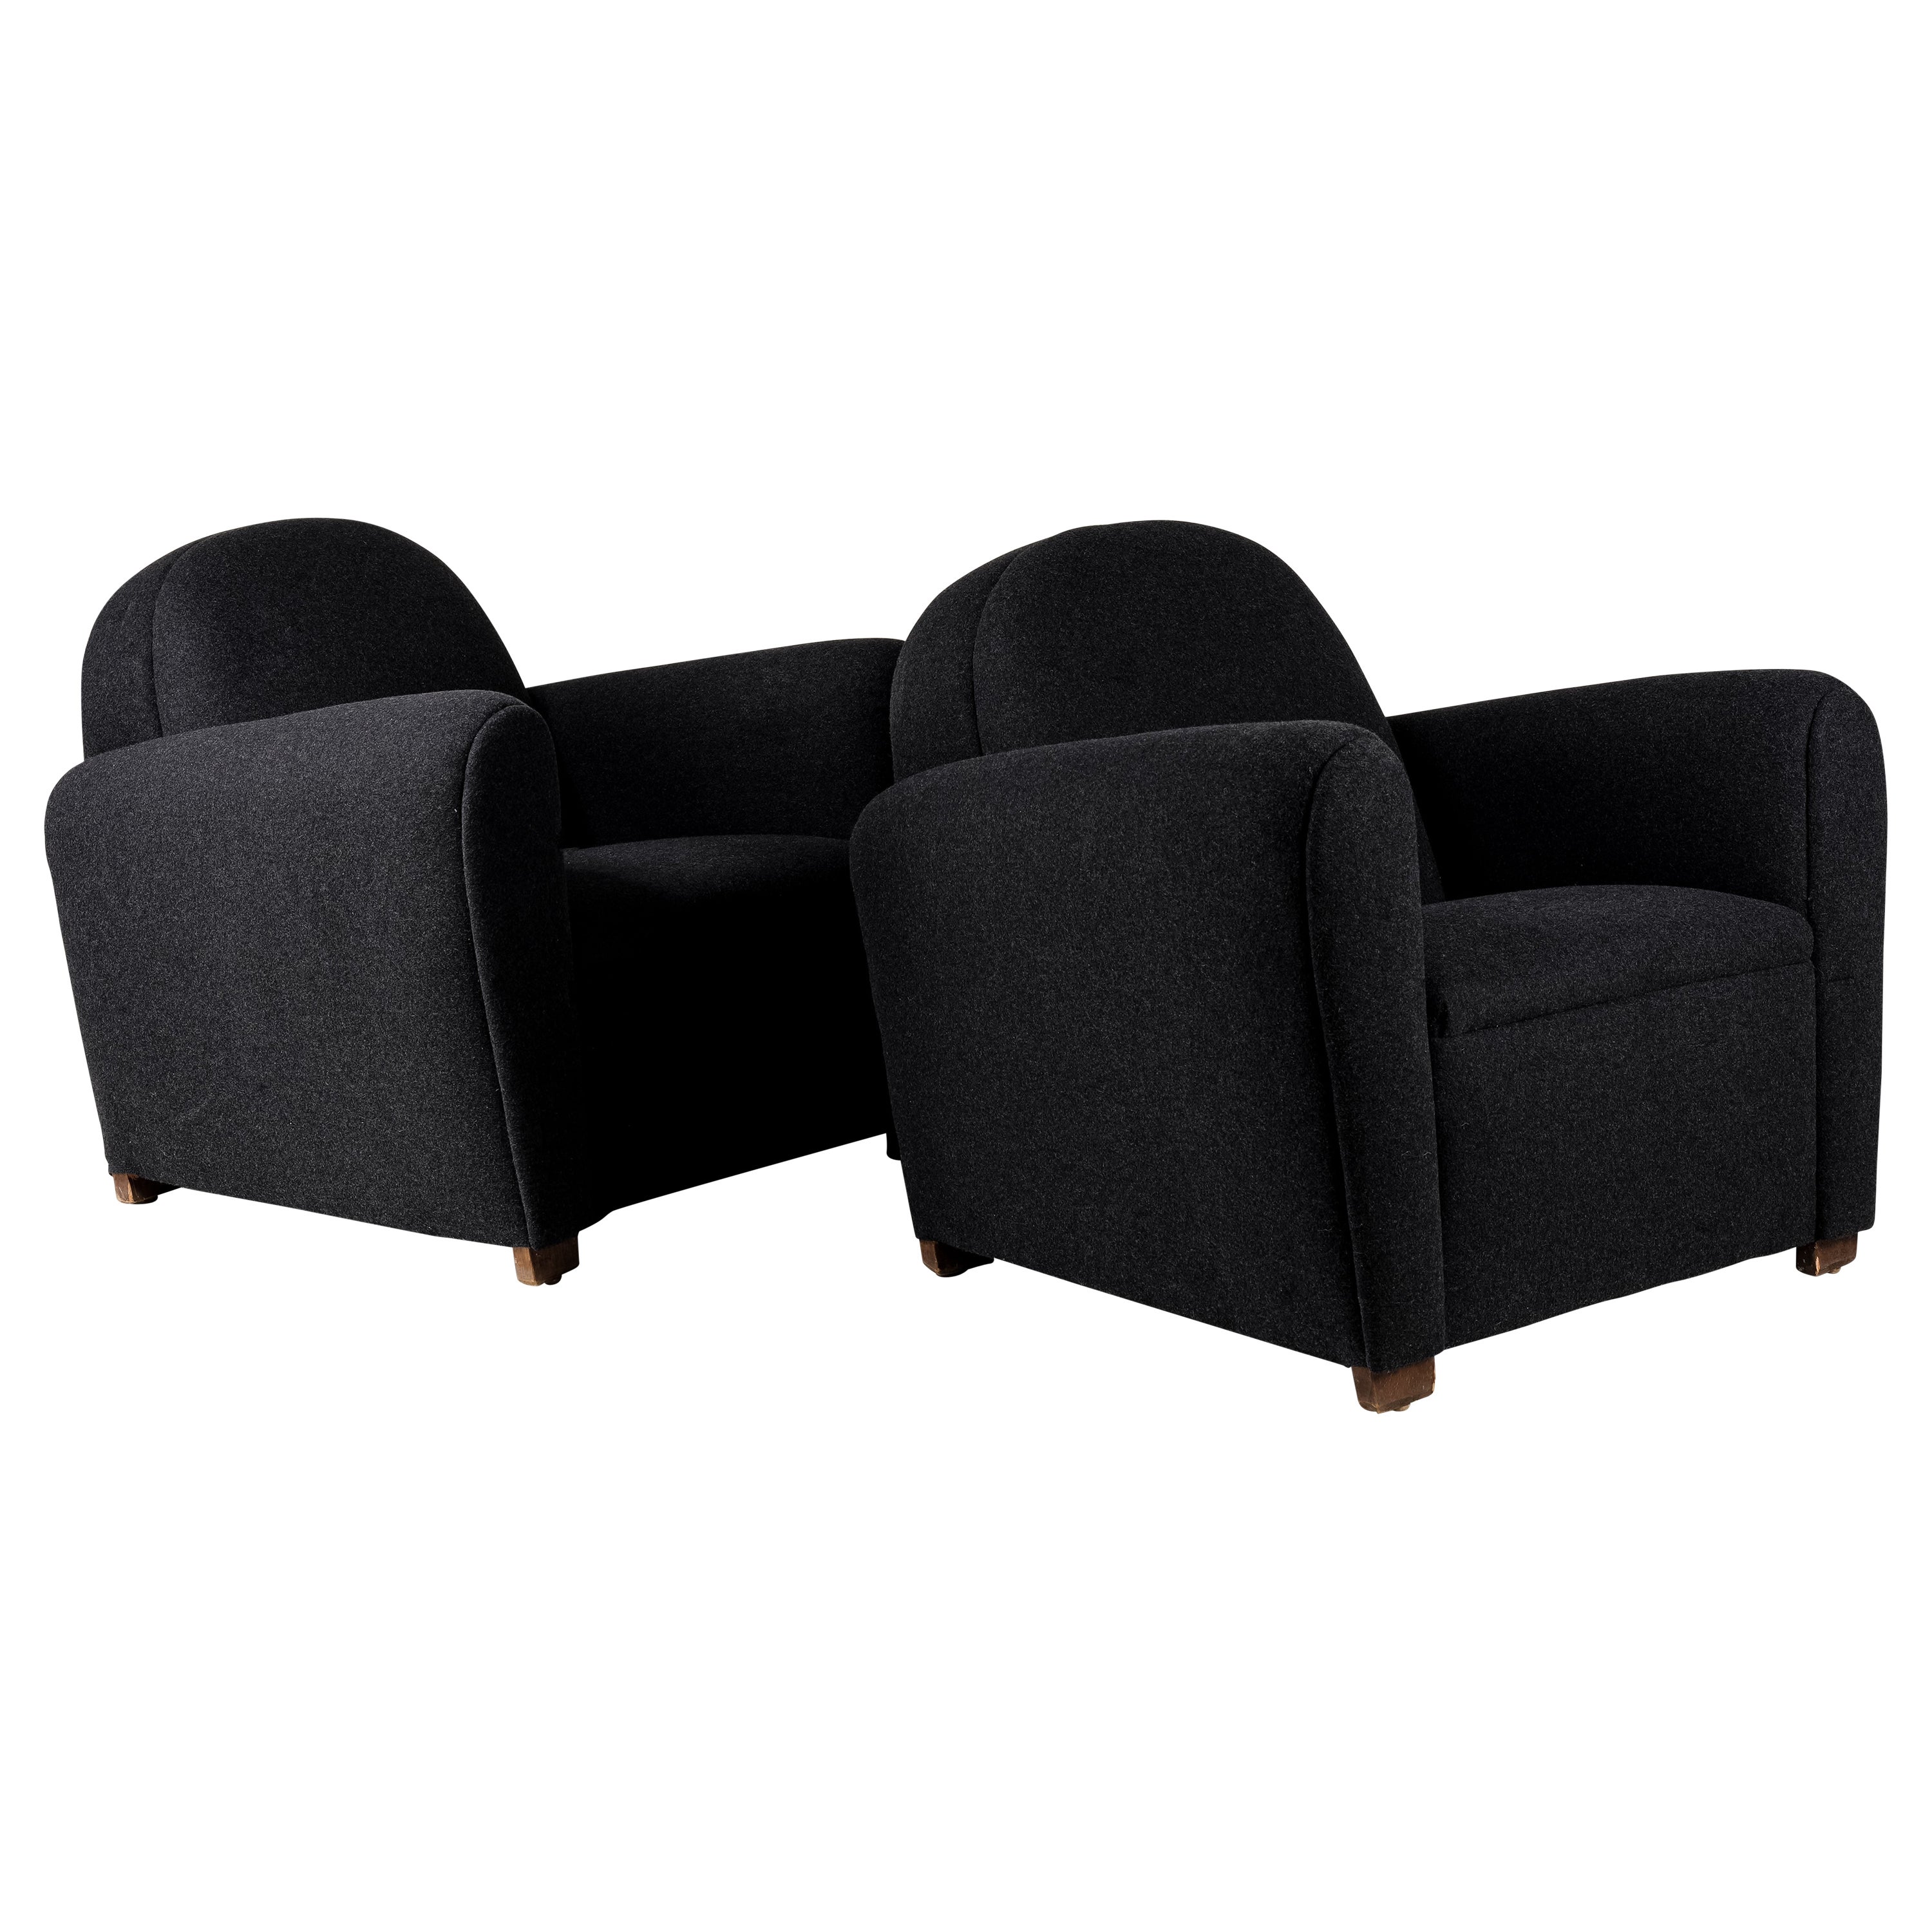 Presenting a sophisticated pair of Art Deco club chairs that exude timeless elegance and style. Inspired by the works of renowned furniture designer Jacques Adnet, these chairs reflect the glamour and artistic flair of the 1930s.

These Art Deco